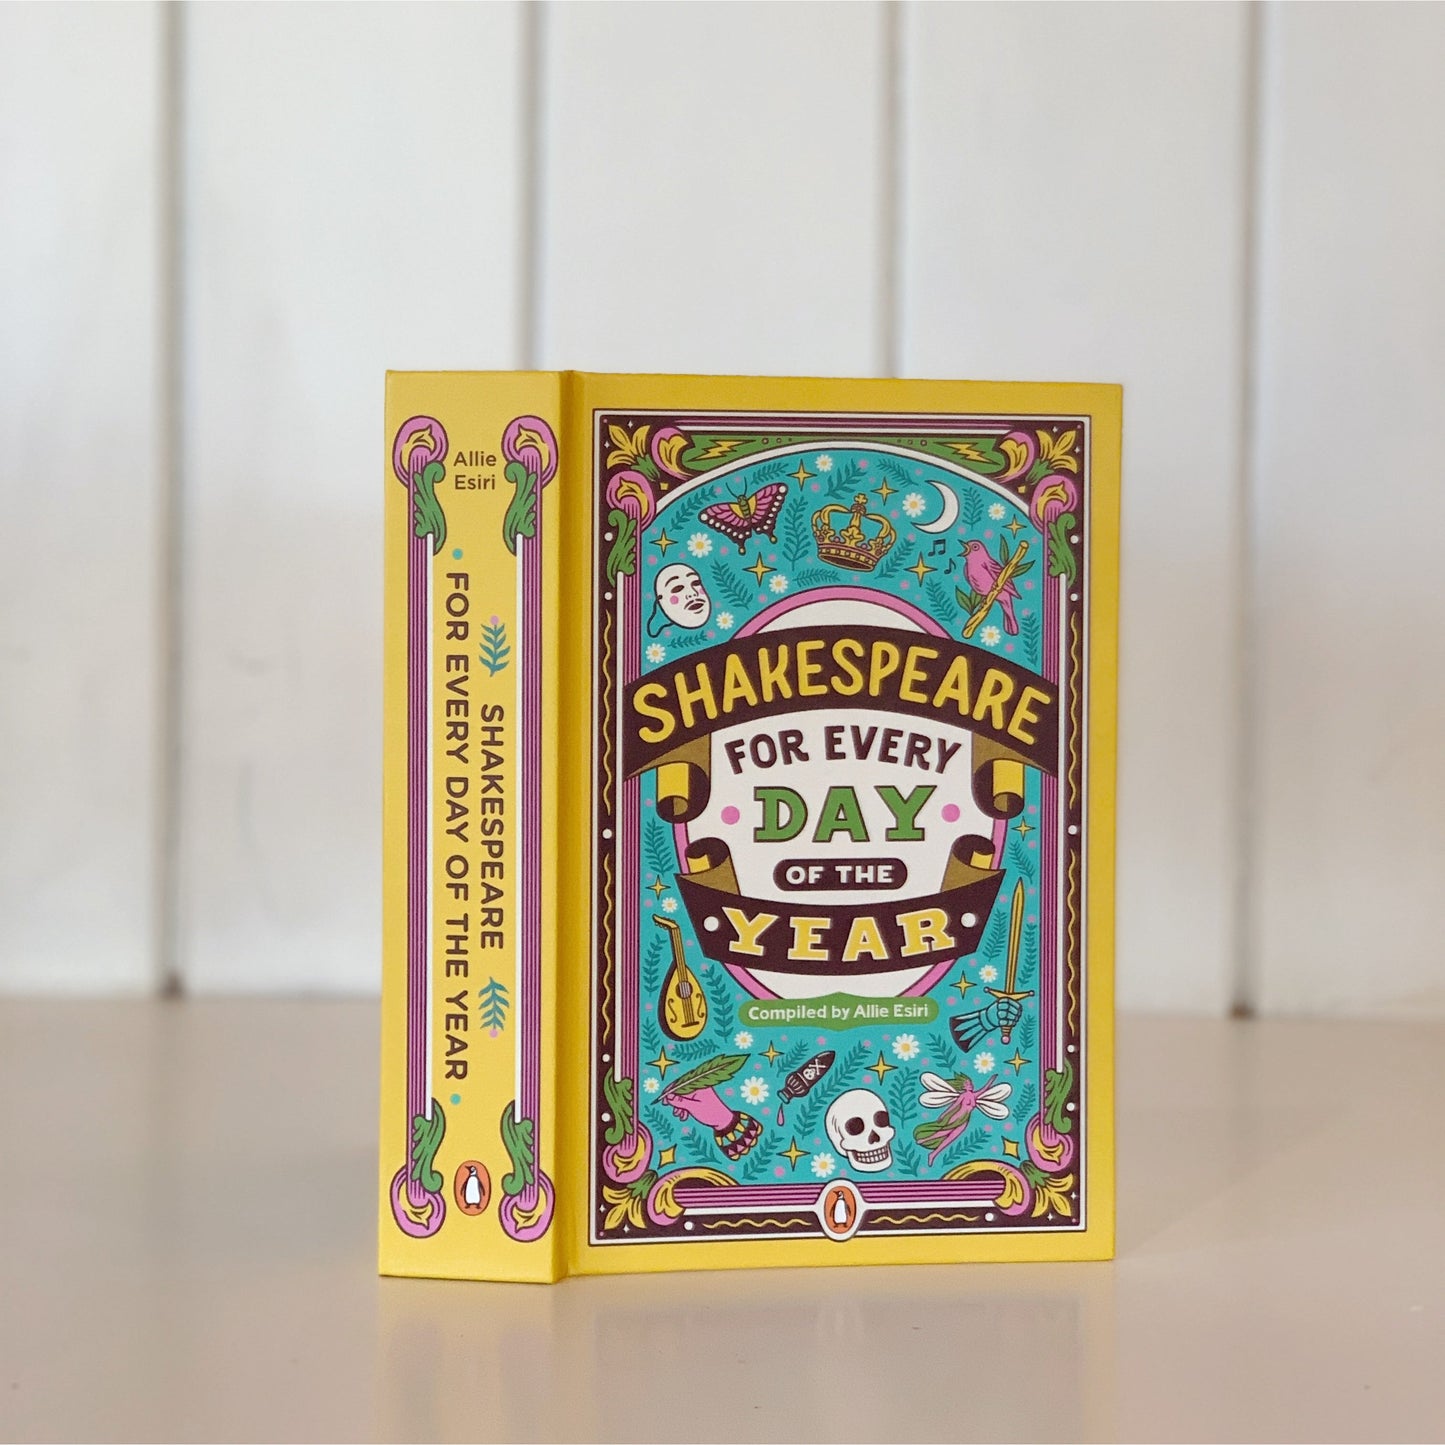 Shakespeare For Every Day of the Year, 2020 Hardcover